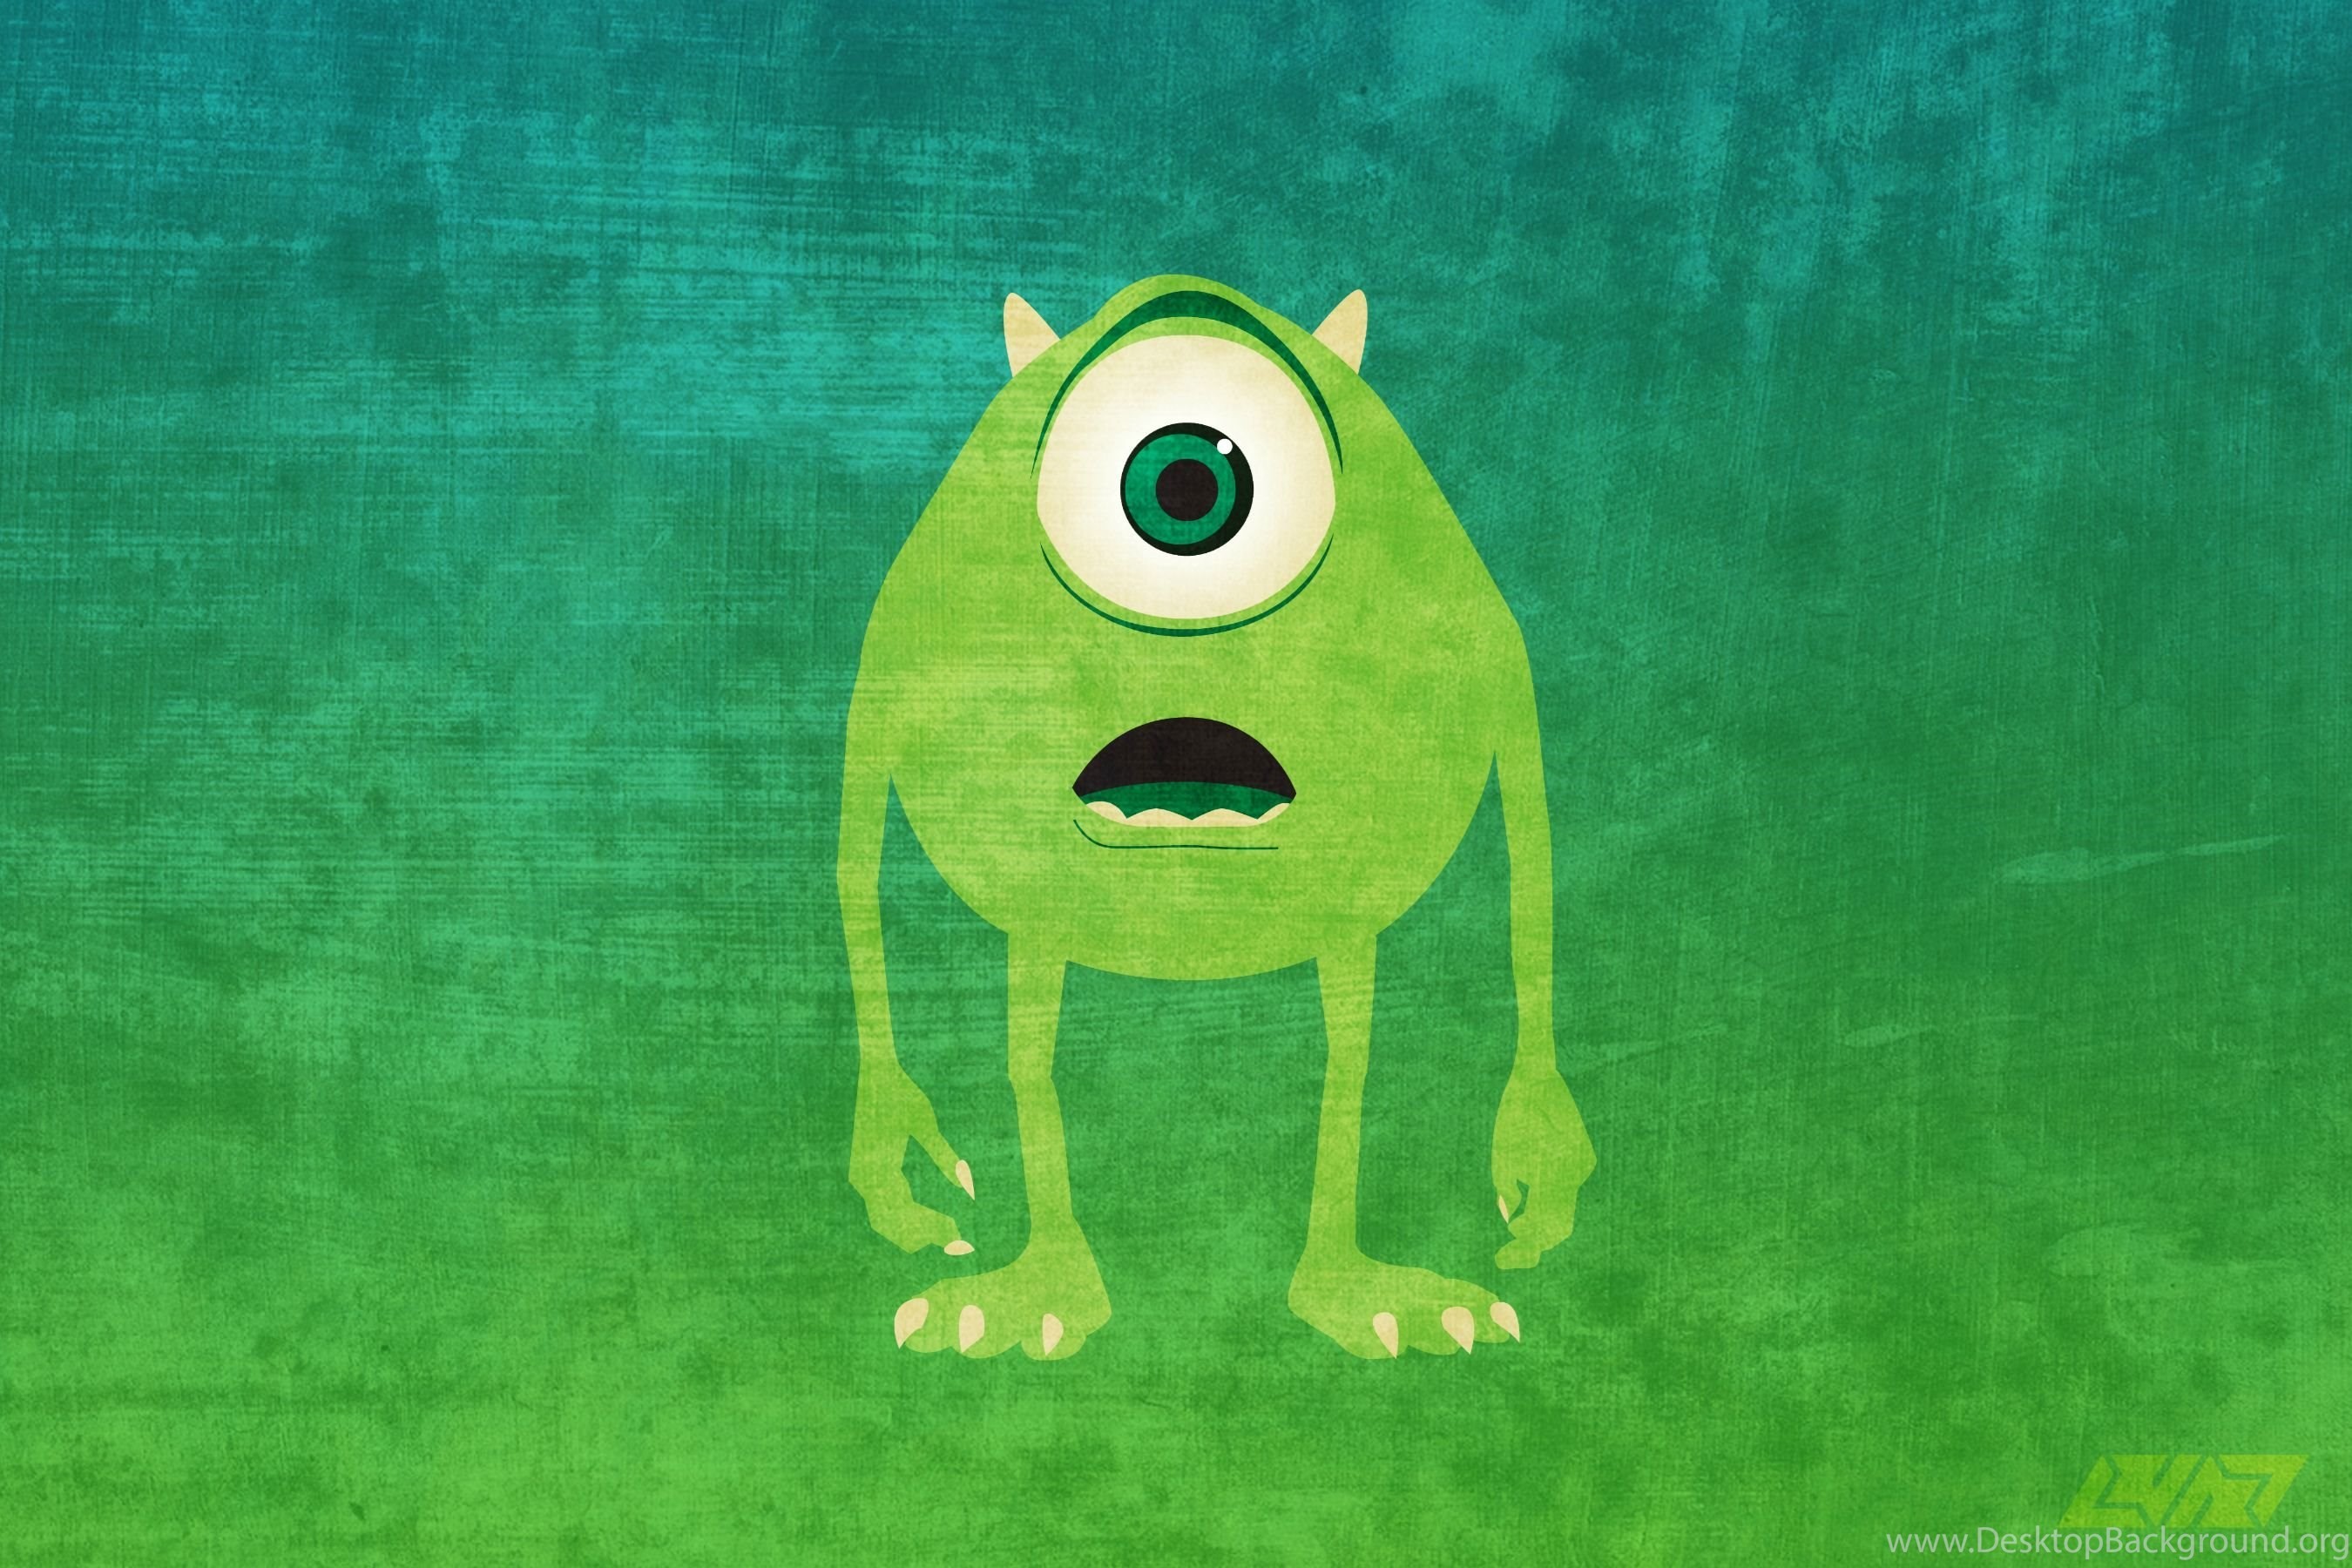 Download free Sulley And Mike Wazowski Wallpaper - MrWallpaper.com